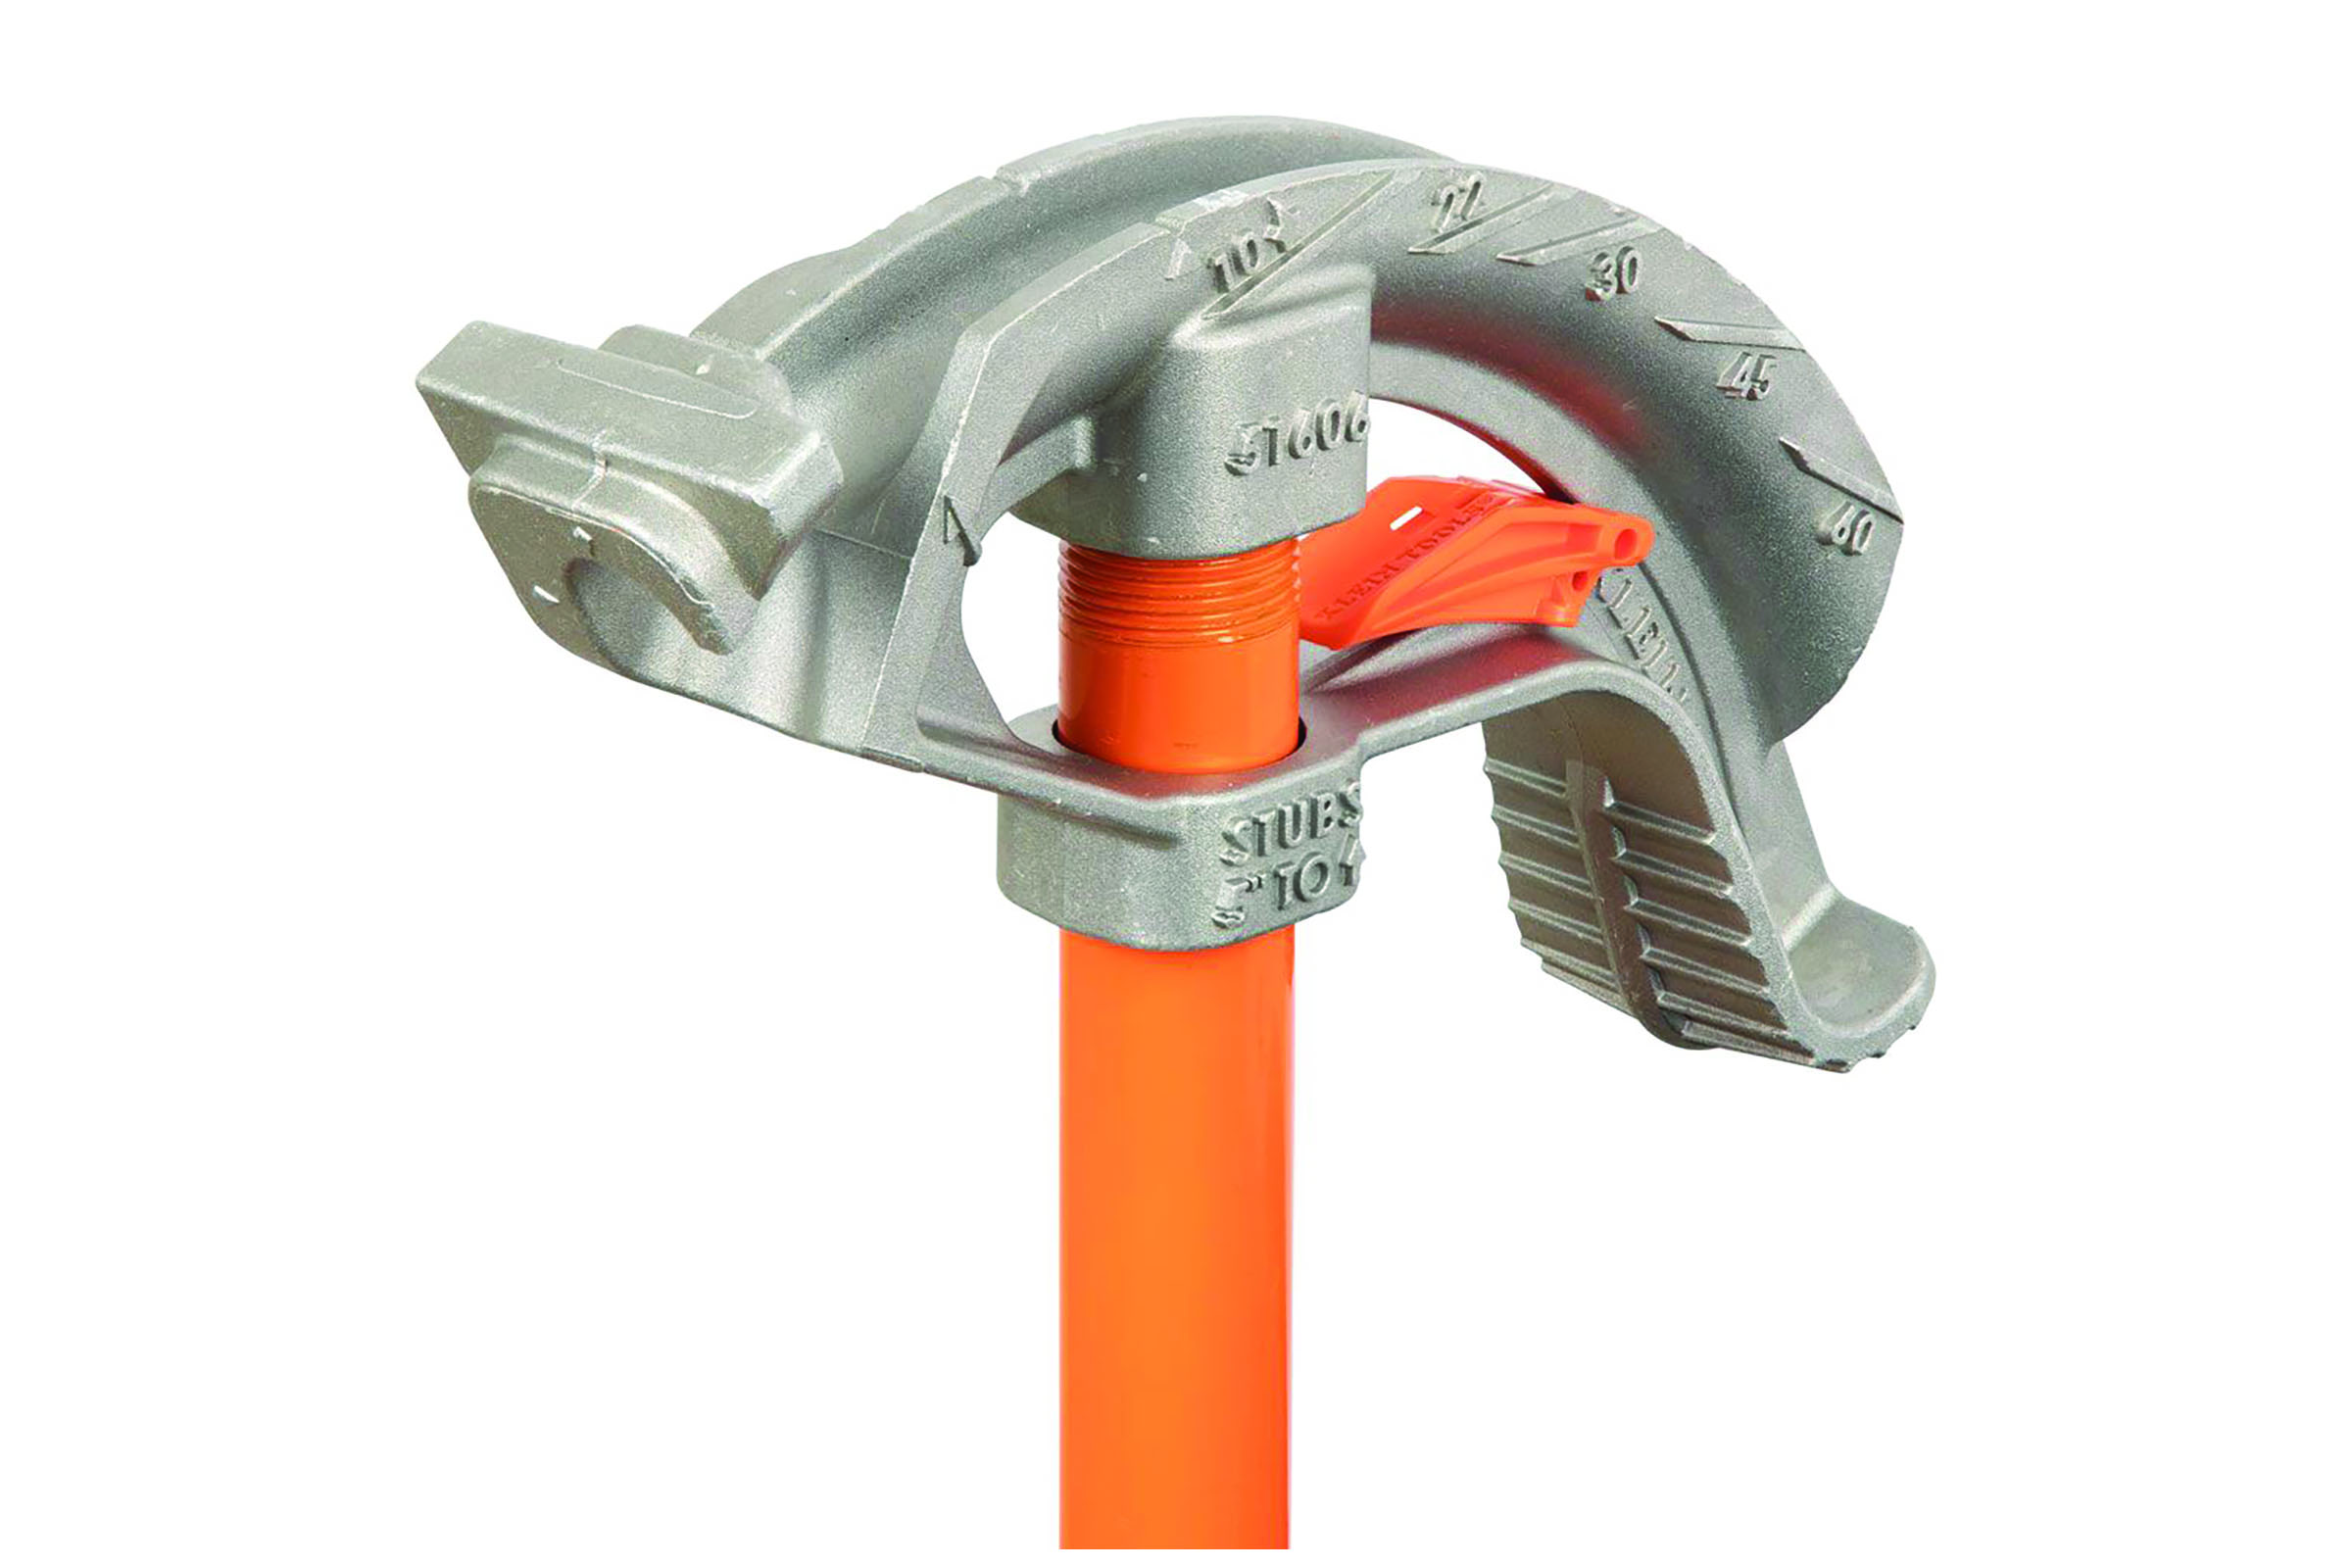 Orange and gray conduit bender. Image by Klein Tools.